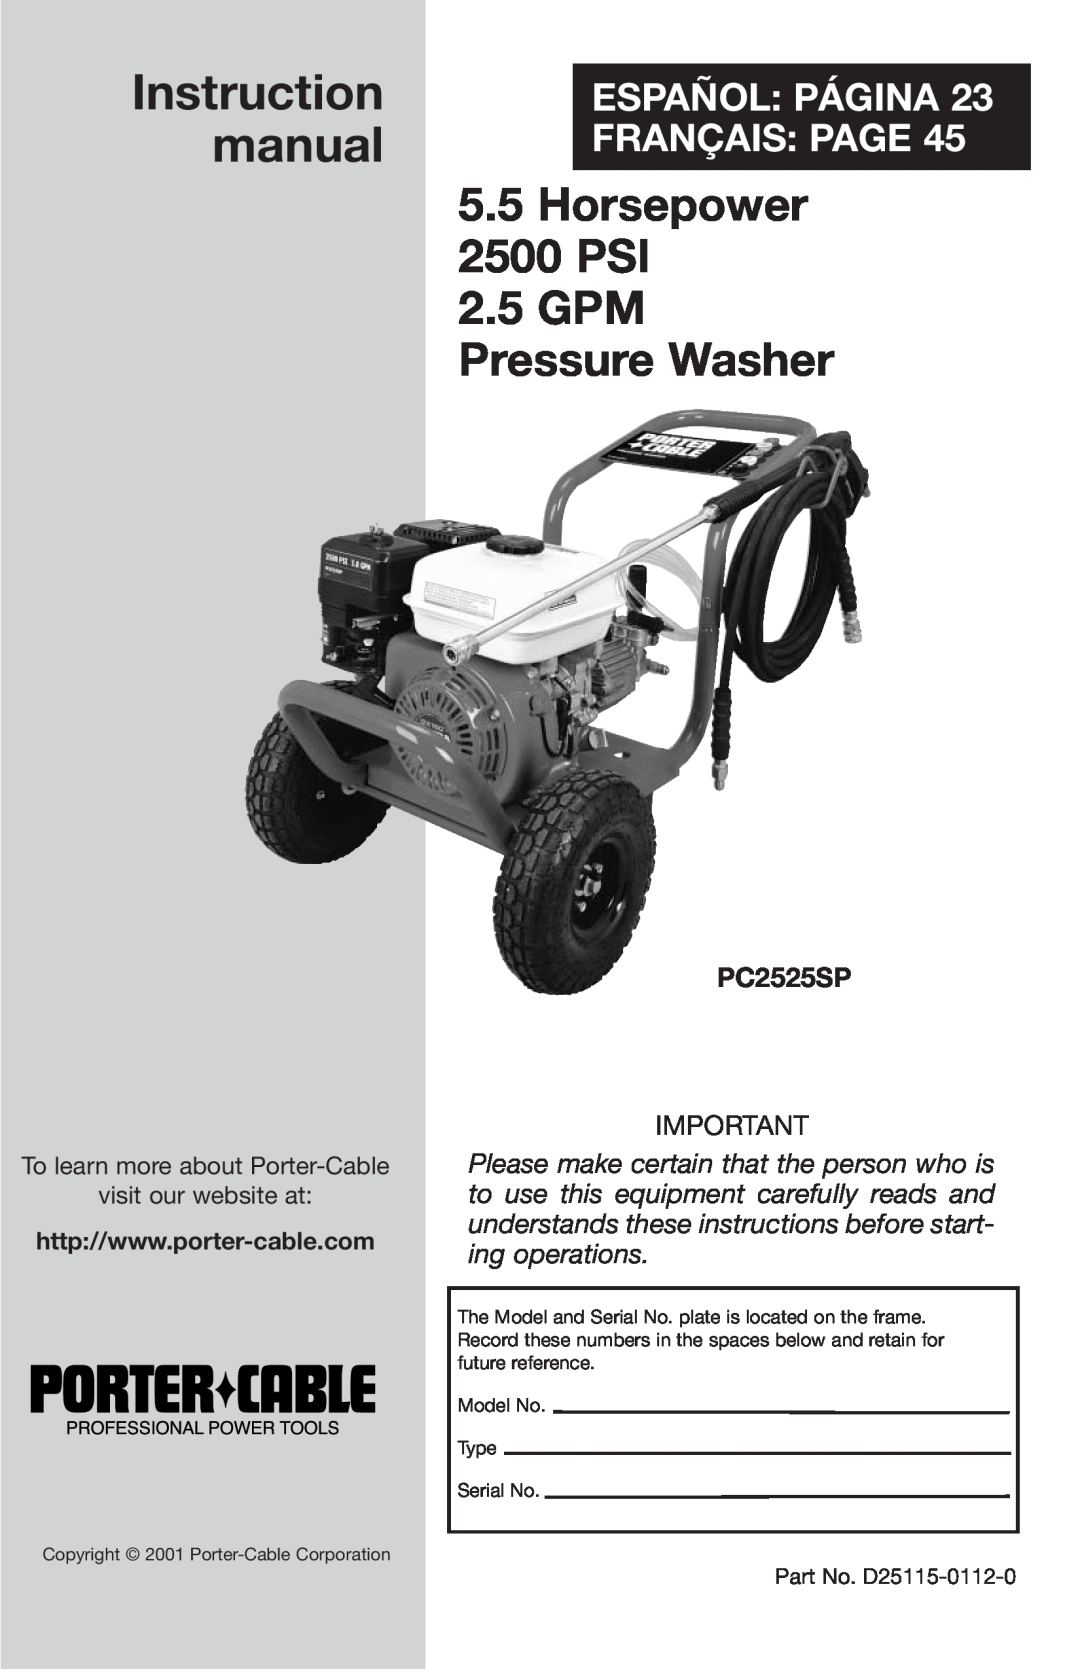 Porter-Cable D25115-0112-0 instruction manual PC2525SP, 5.5Horsepower 2500 PSI, 2.5GPM Pressure Washer 